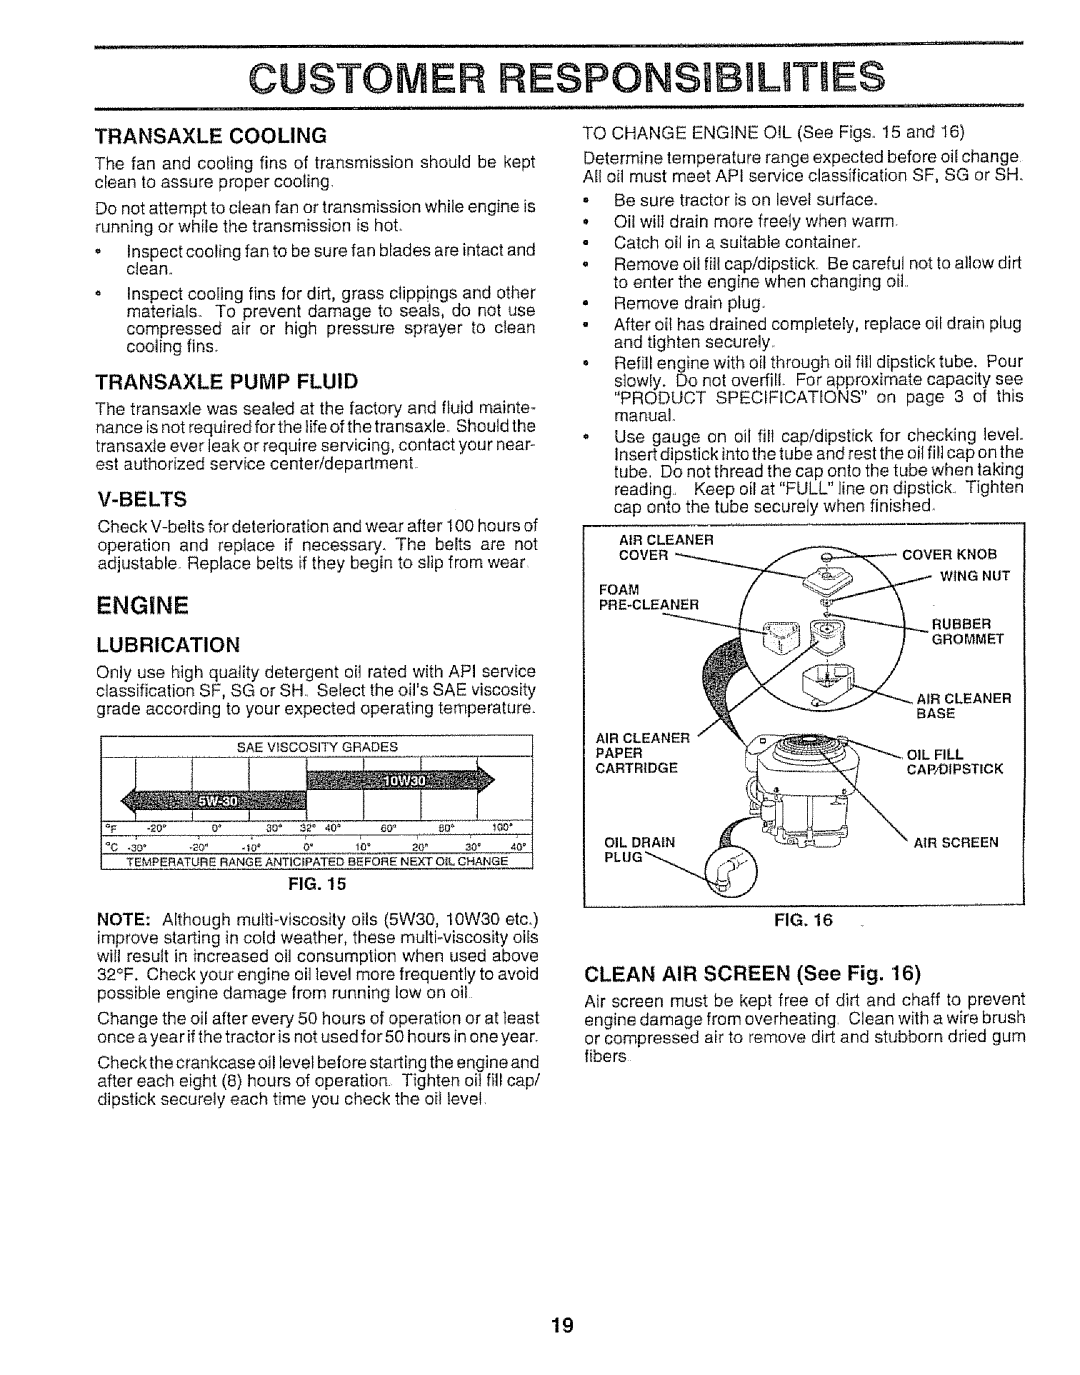 Craftsman 917.259592 owner manual Transaxle Cooling, Engine, CLEAN AIR SCREEN See Fig, Lubrication 